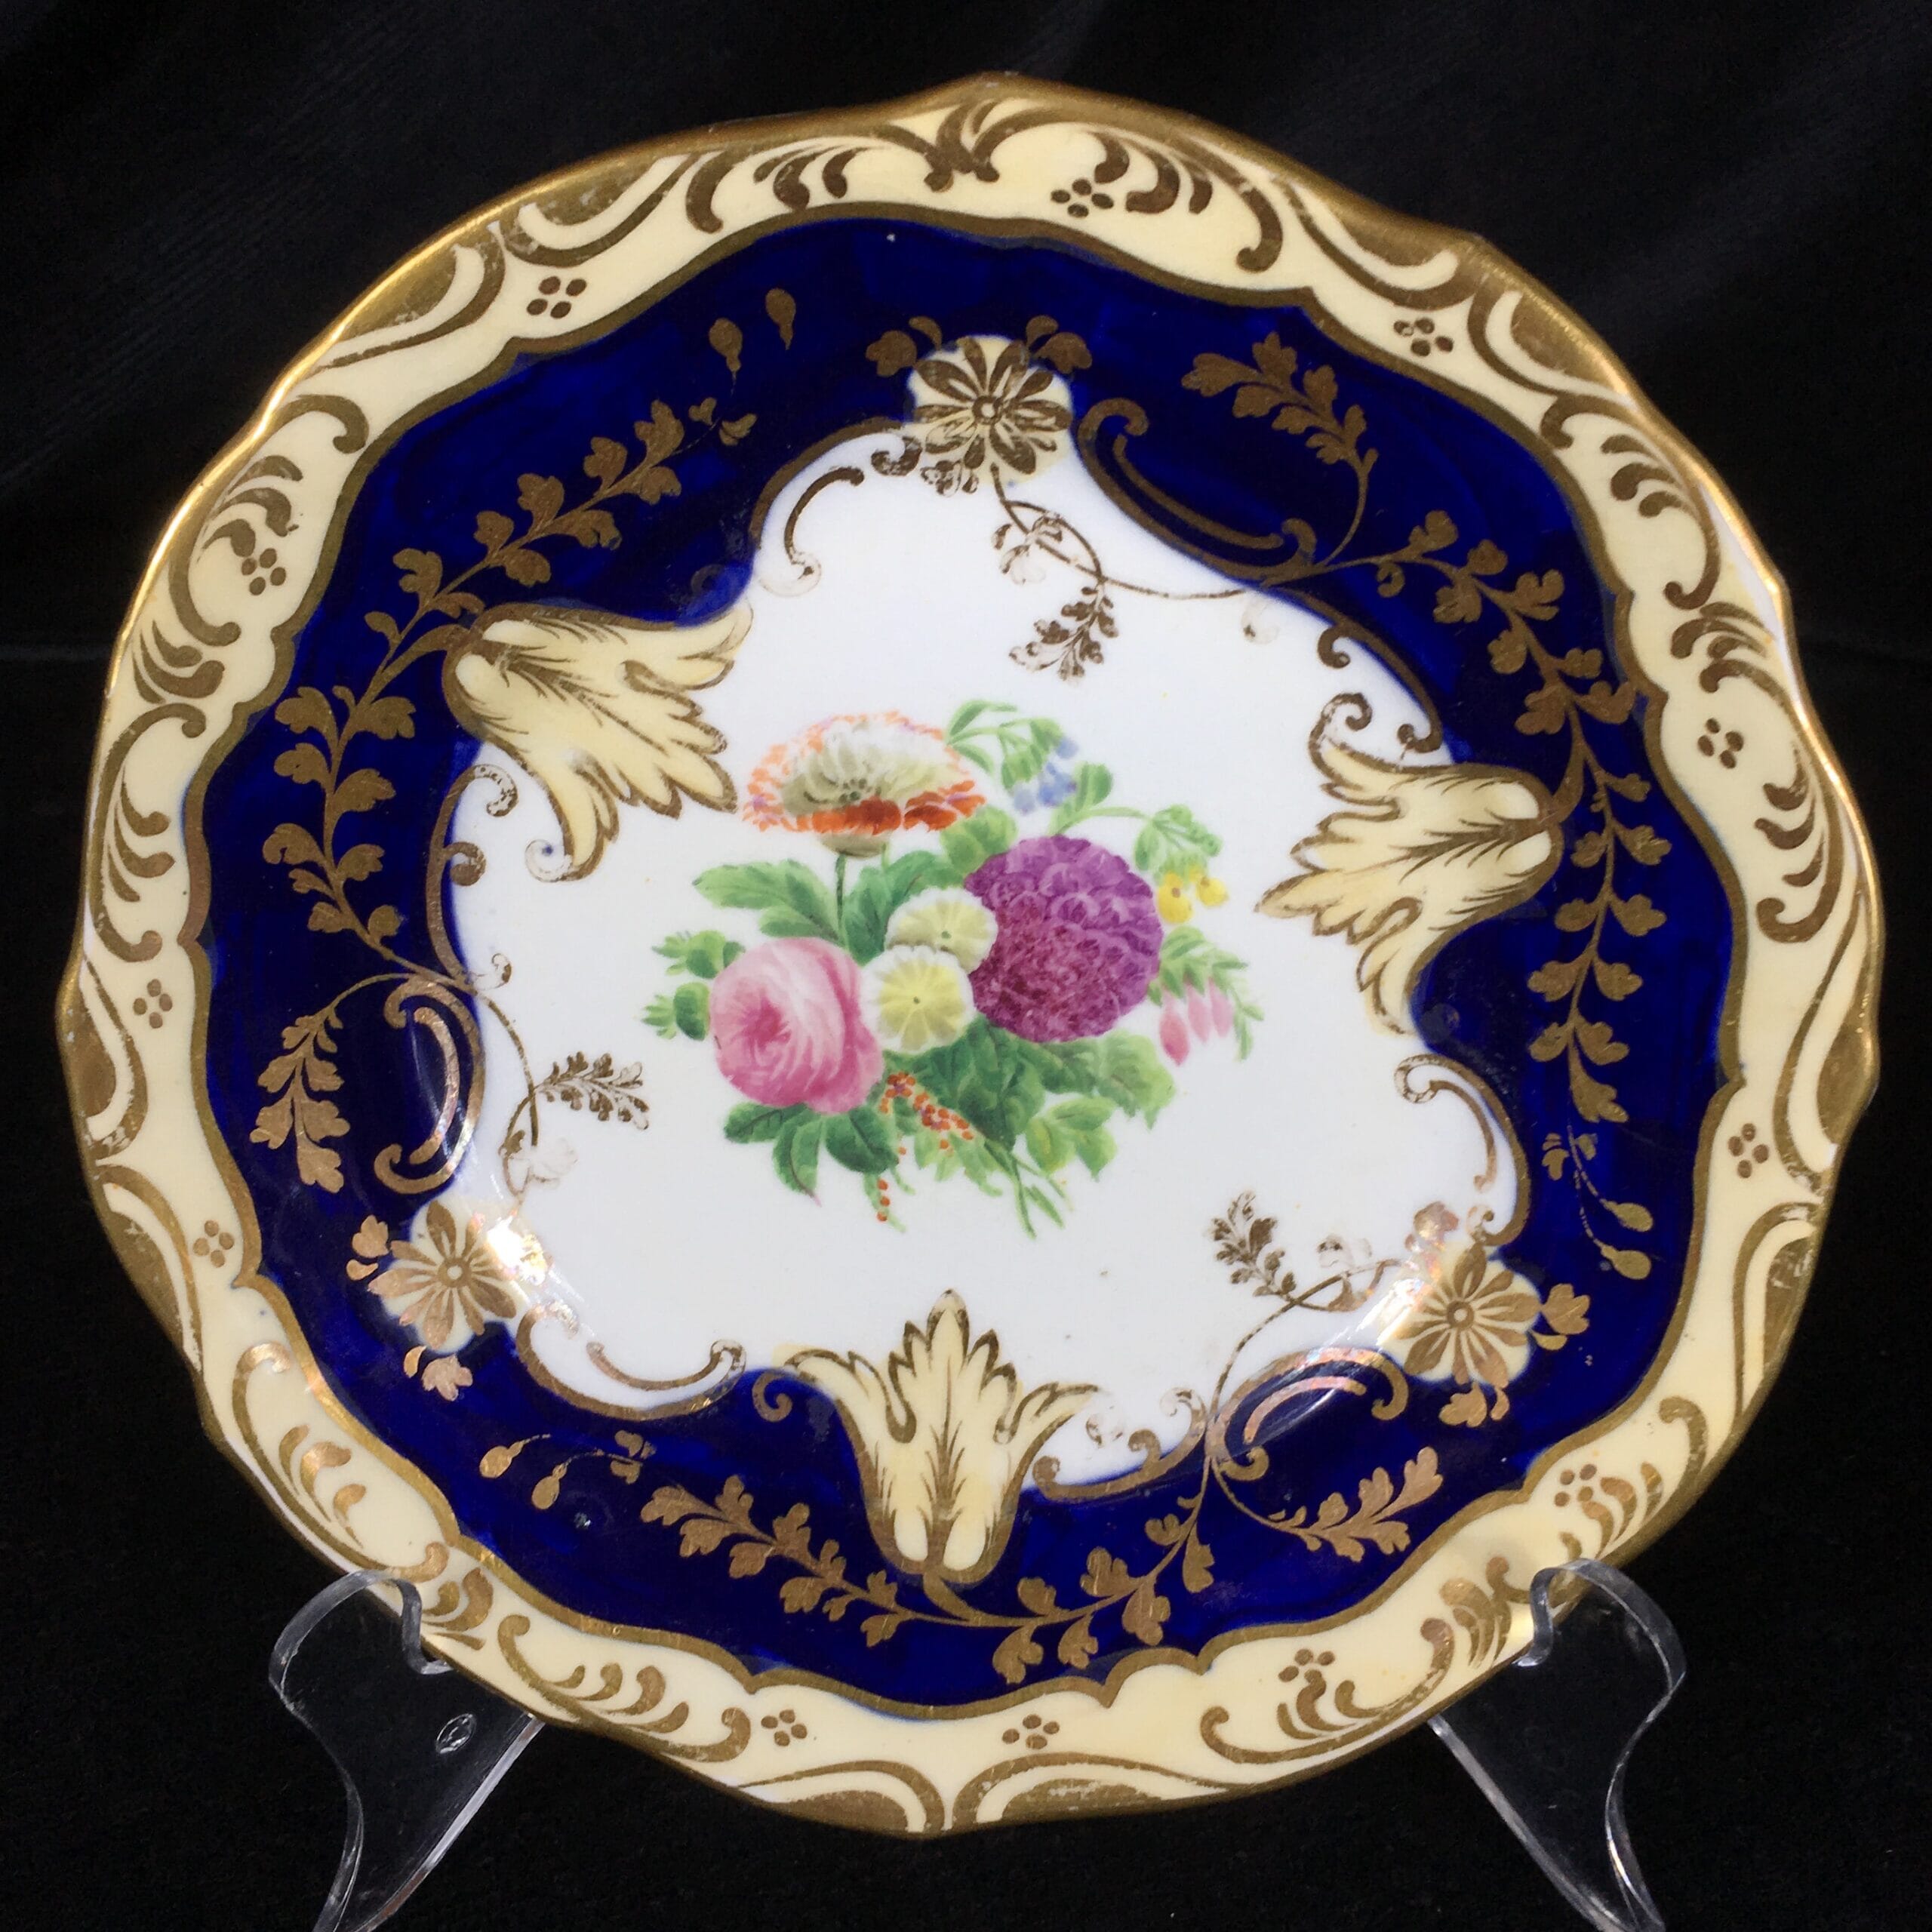 English porcelain plate painted with flowers c. 1860 -0